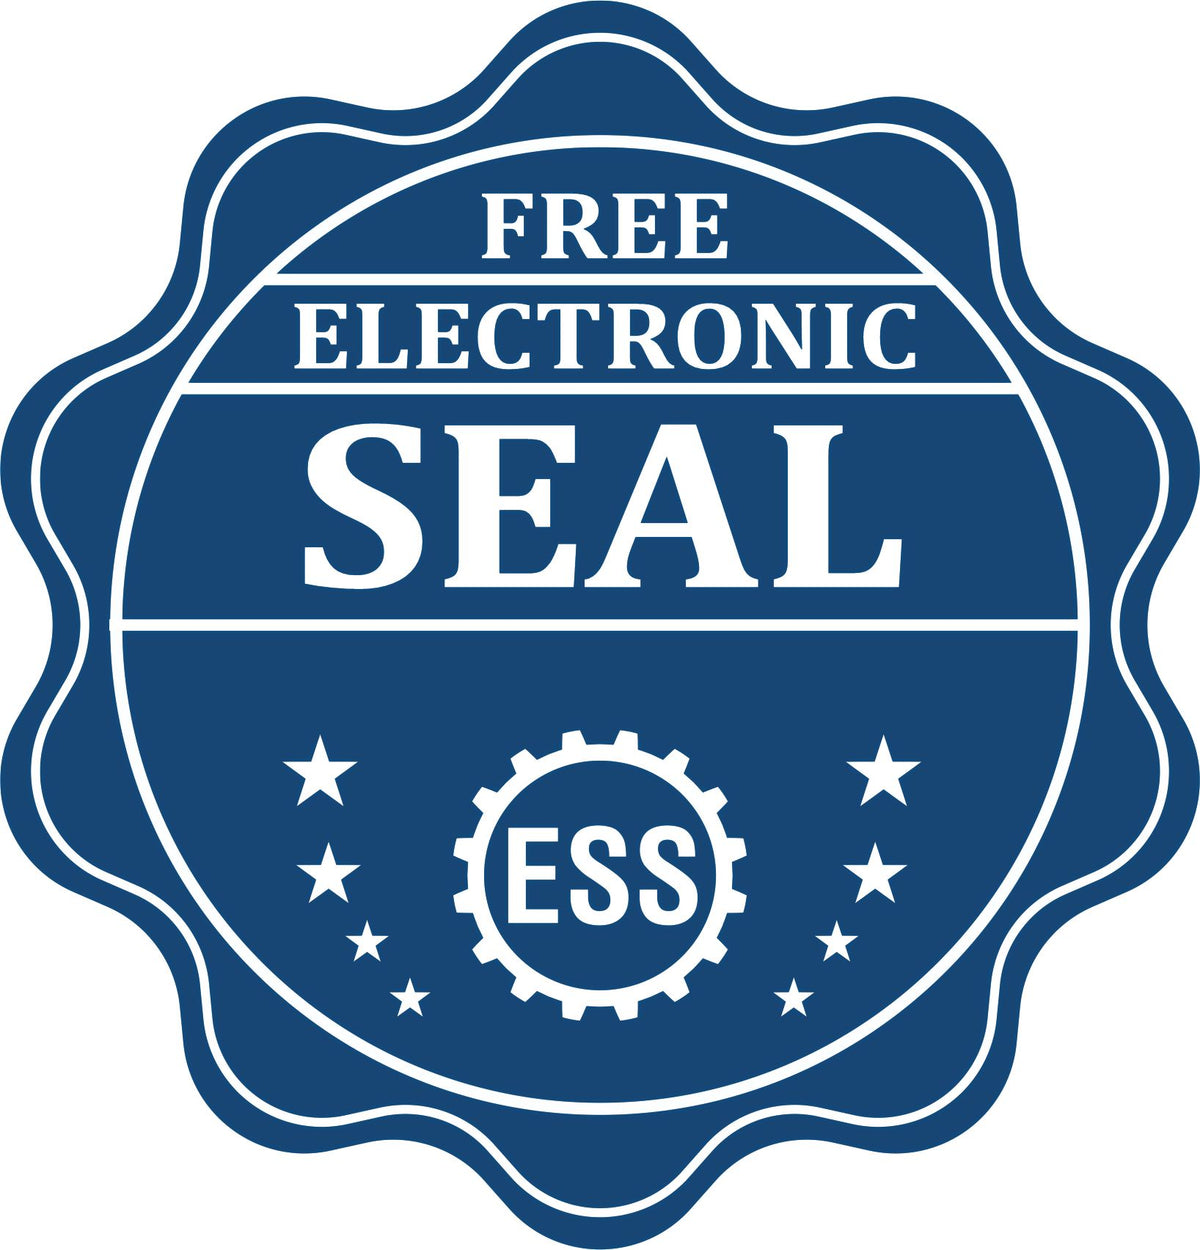 A badge showing a free electronic seal for the Soft Pocket Hawaii Landscape Architect Embosser with stars and the ESS gear on the emblem.